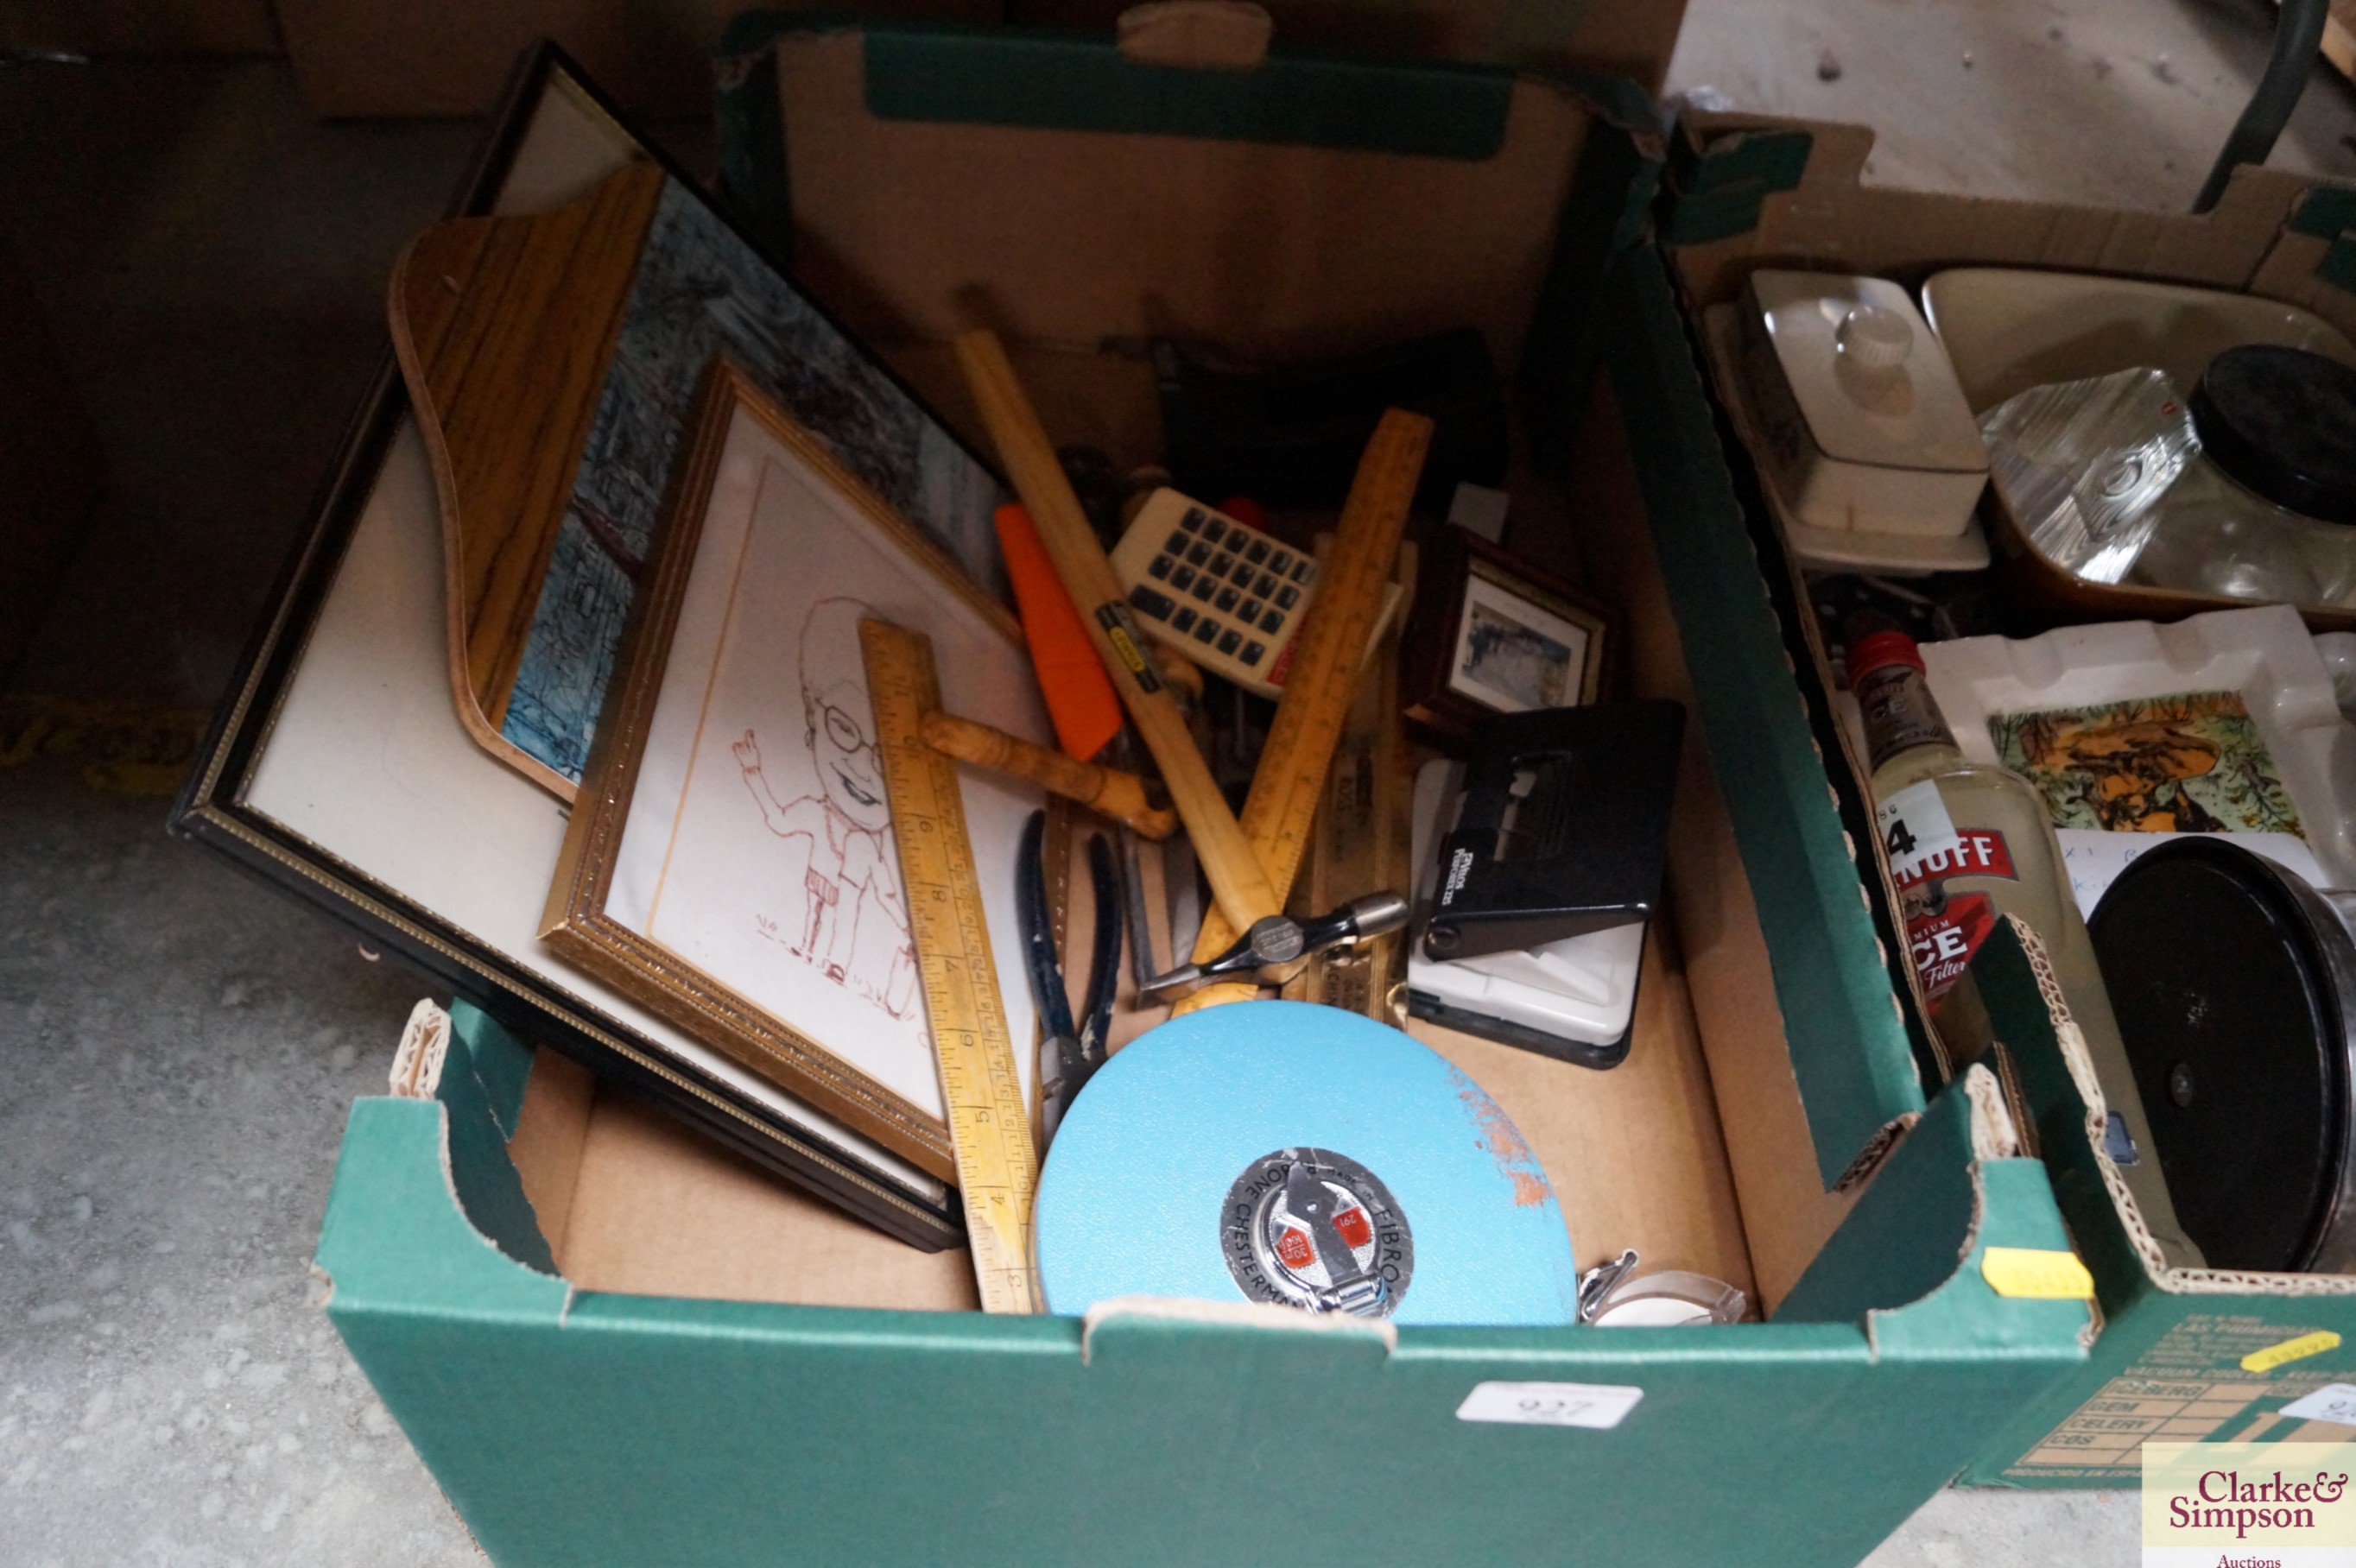 A box containing various stationery; pictures and